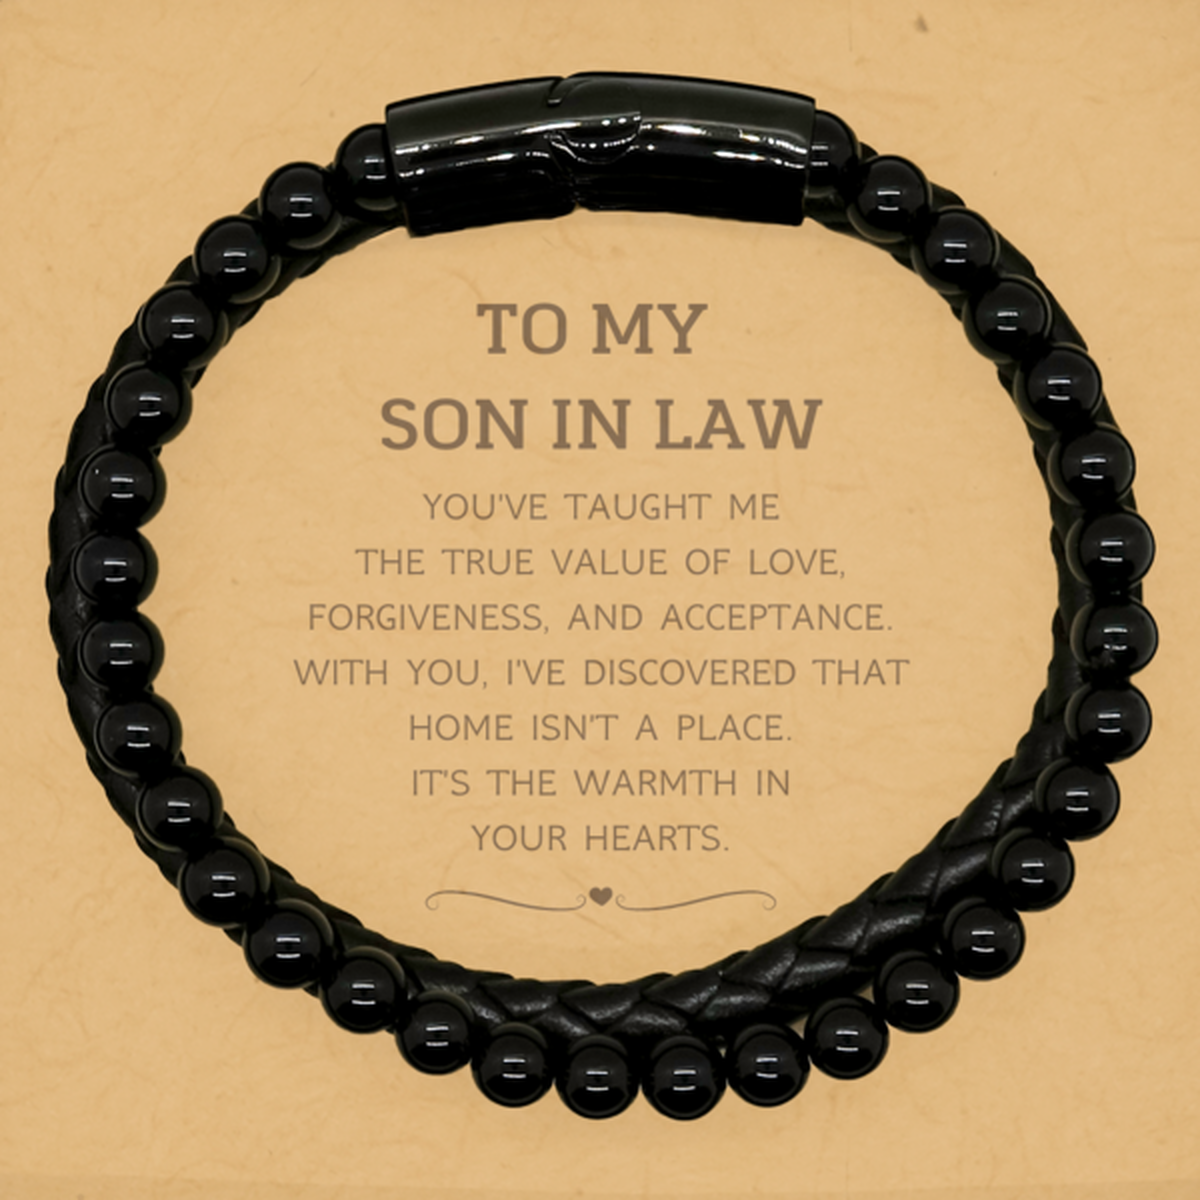 To My Son In Law Gifts, You've taught me the true value of love, Thank You Gifts For Son In Law, Birthday Stone Leather Bracelets For Son In Law